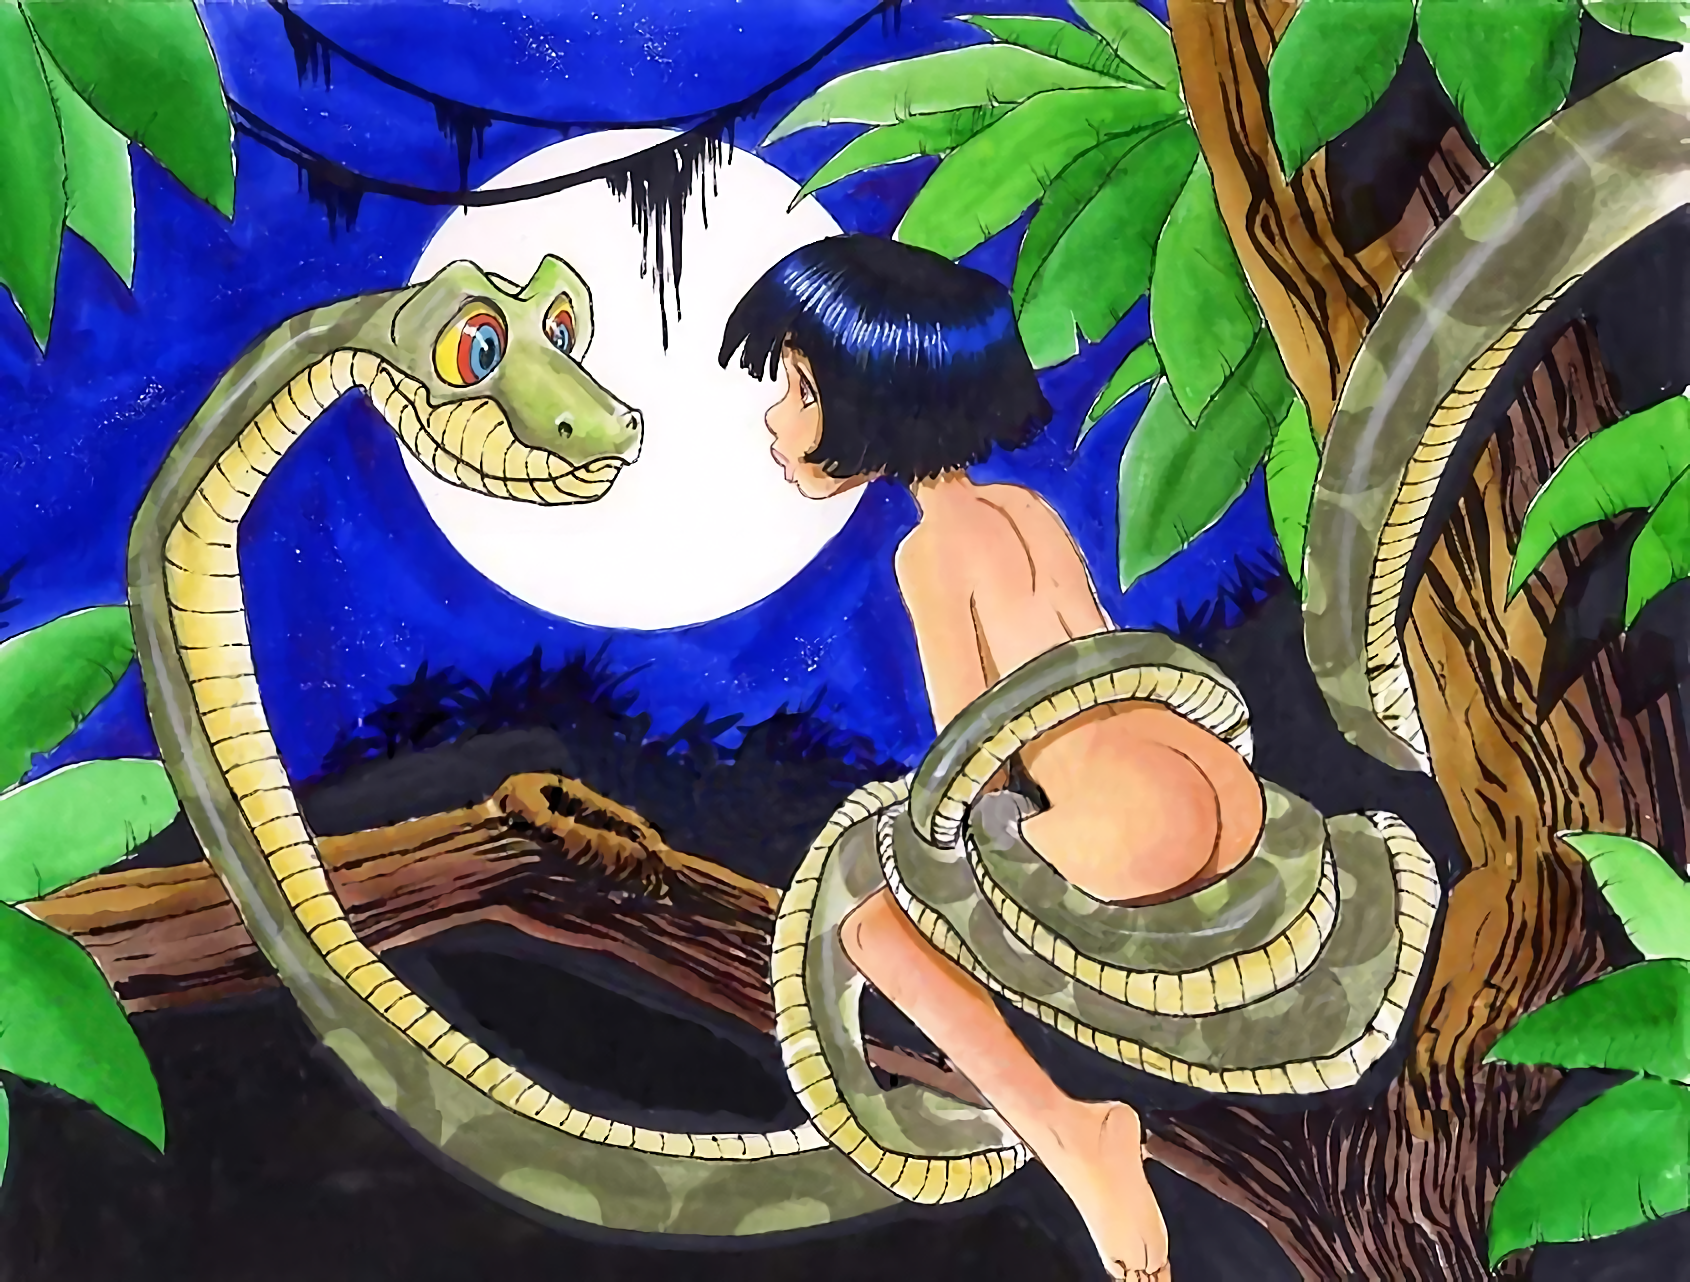 Sitting with Kaa - hypnotherapy? 